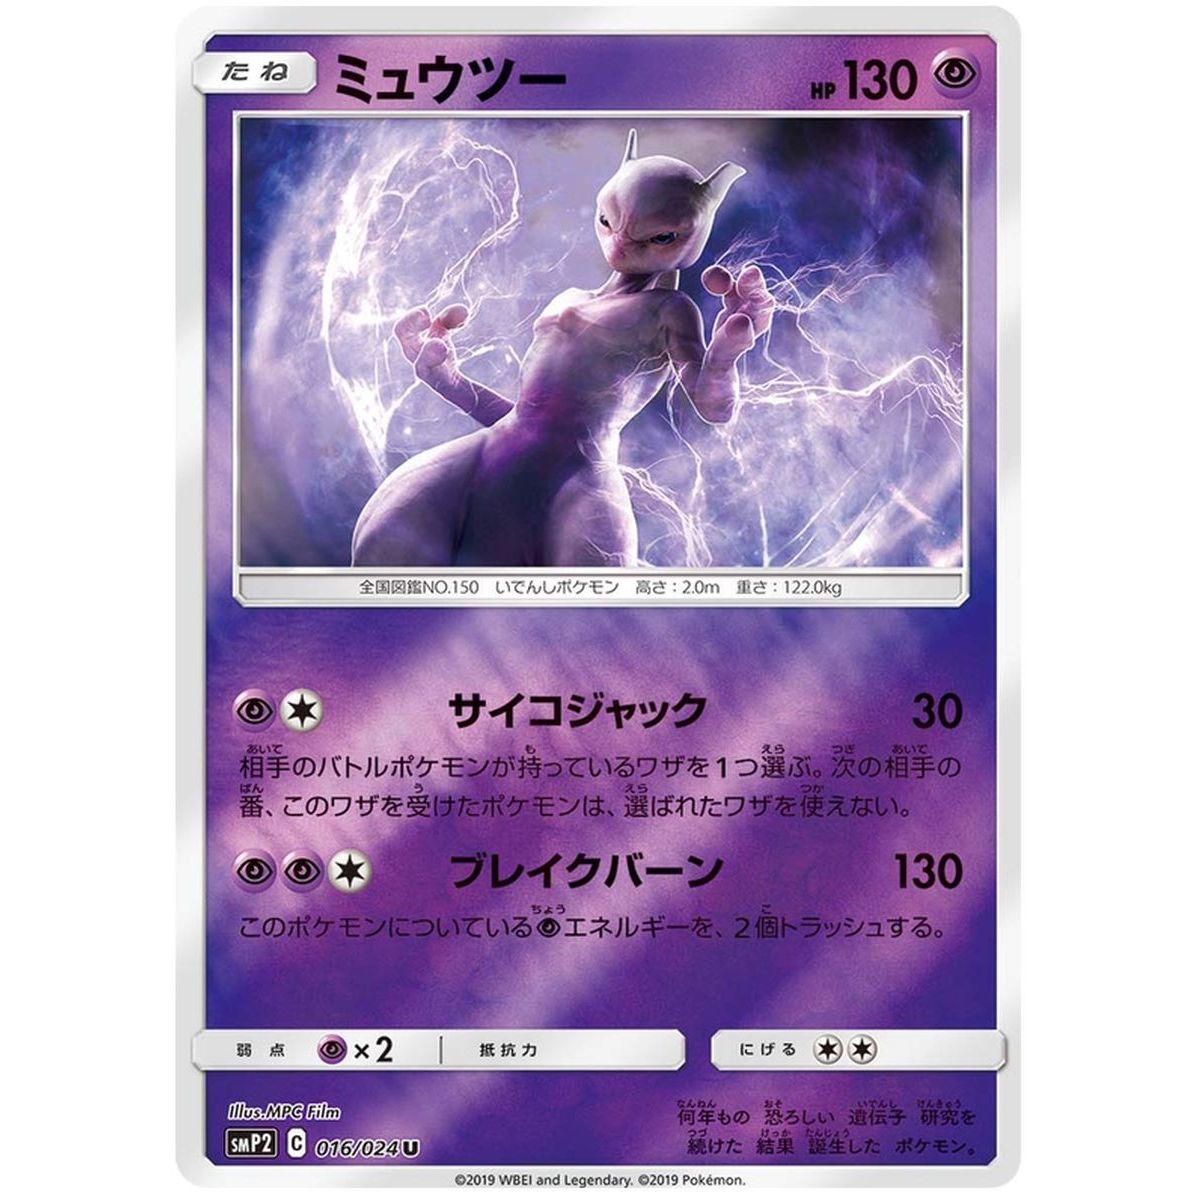 Mewtwo 016/024 Detective Pikachu Uncommon Unlimited Japanese